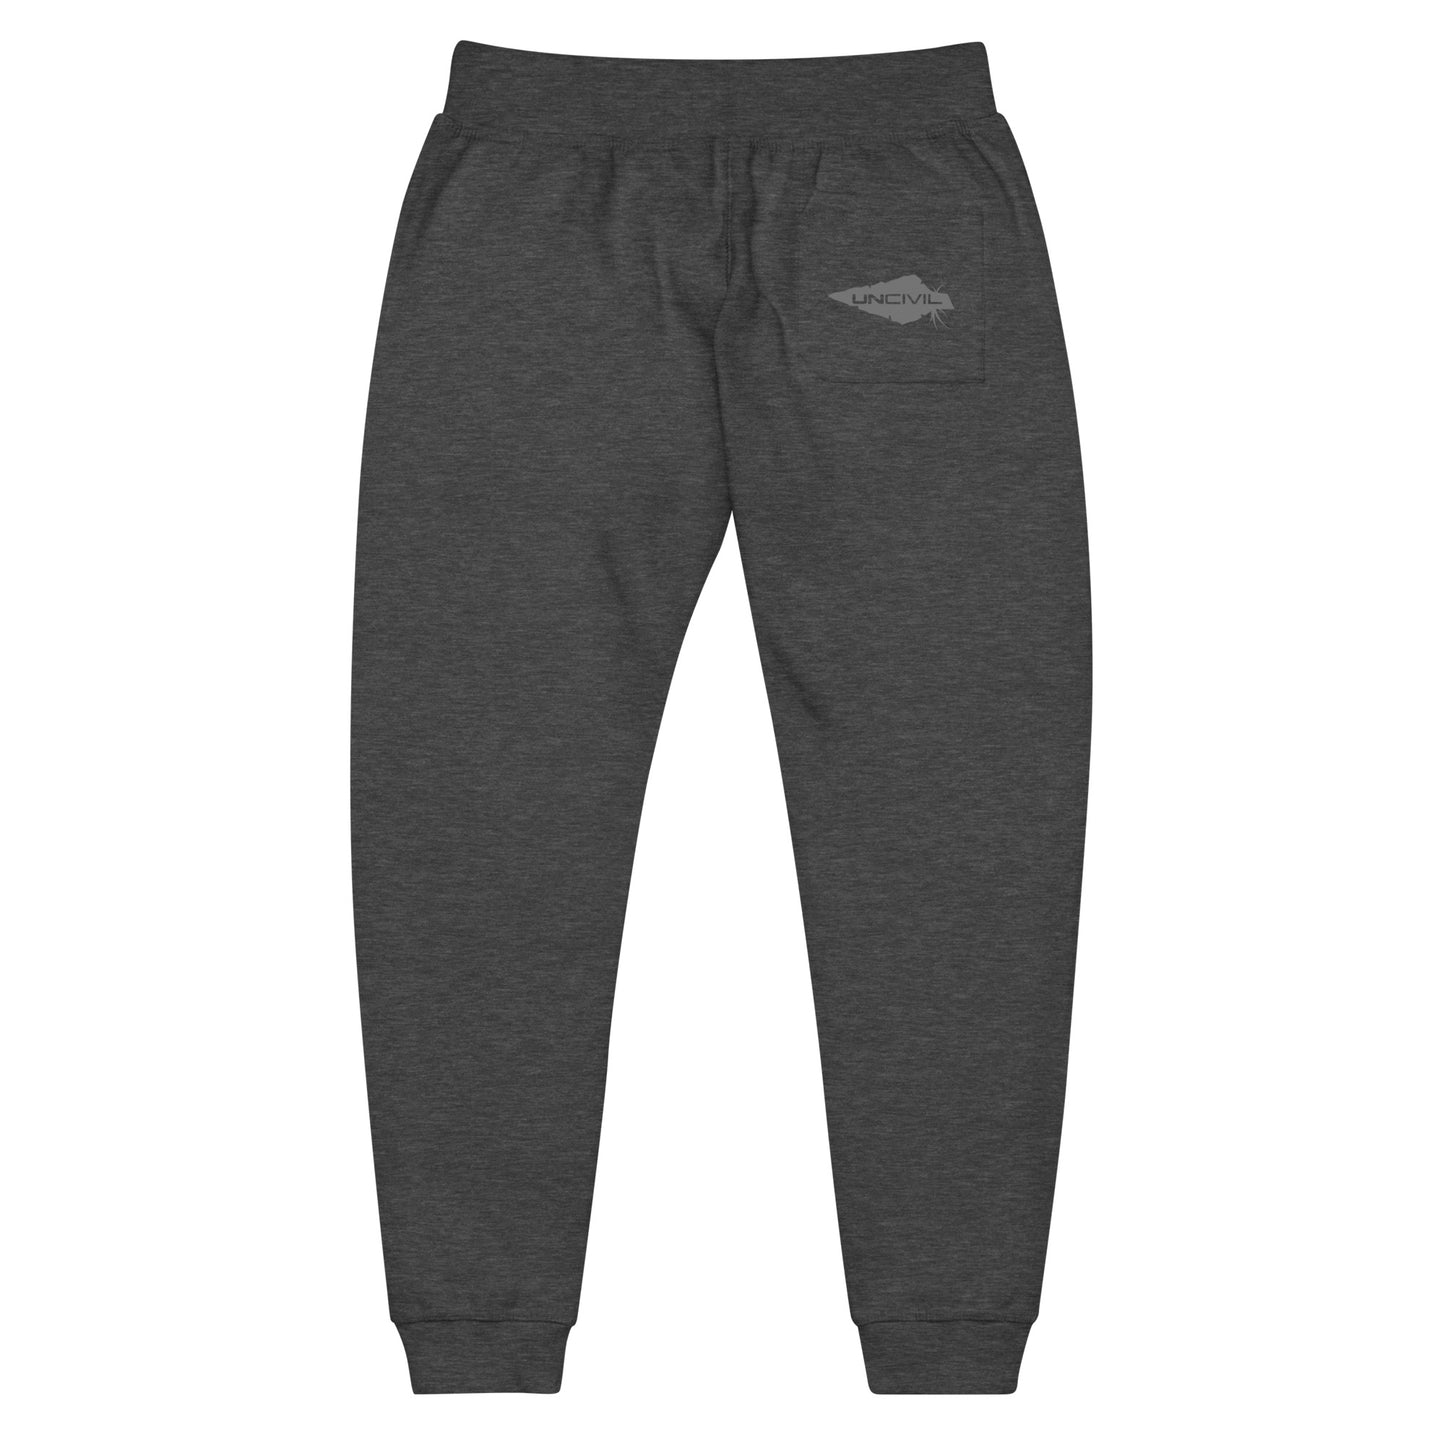 Charcoal grey sweatpants, UNCIVIL on front left leg and UNCIVIL patch on the back right pocket.